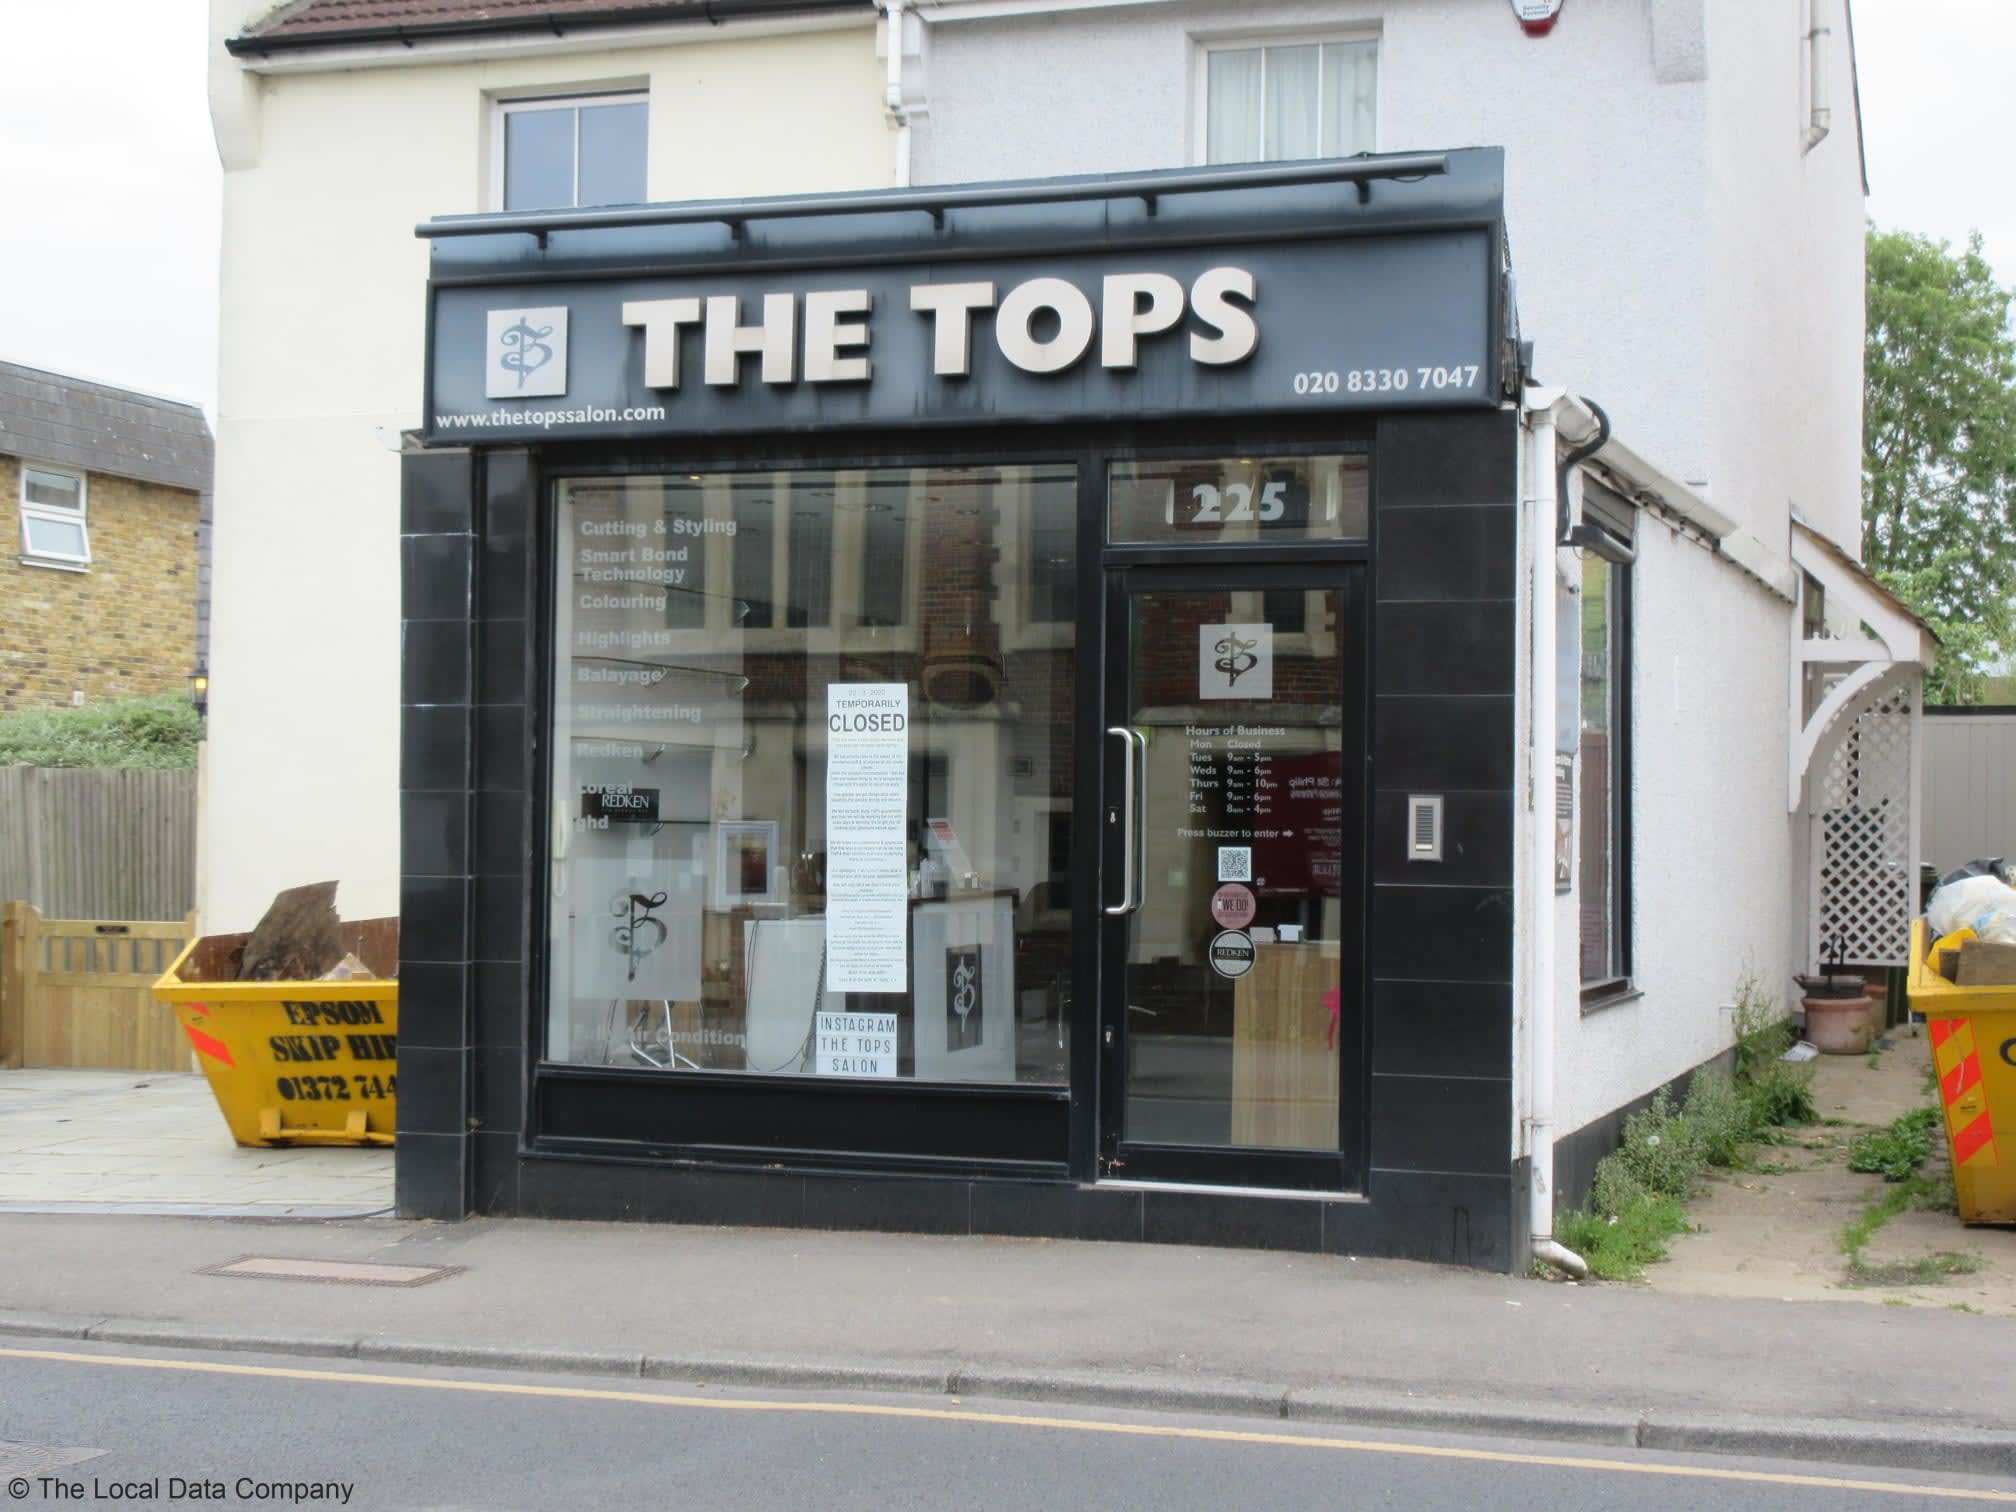 Images The Tops Salon